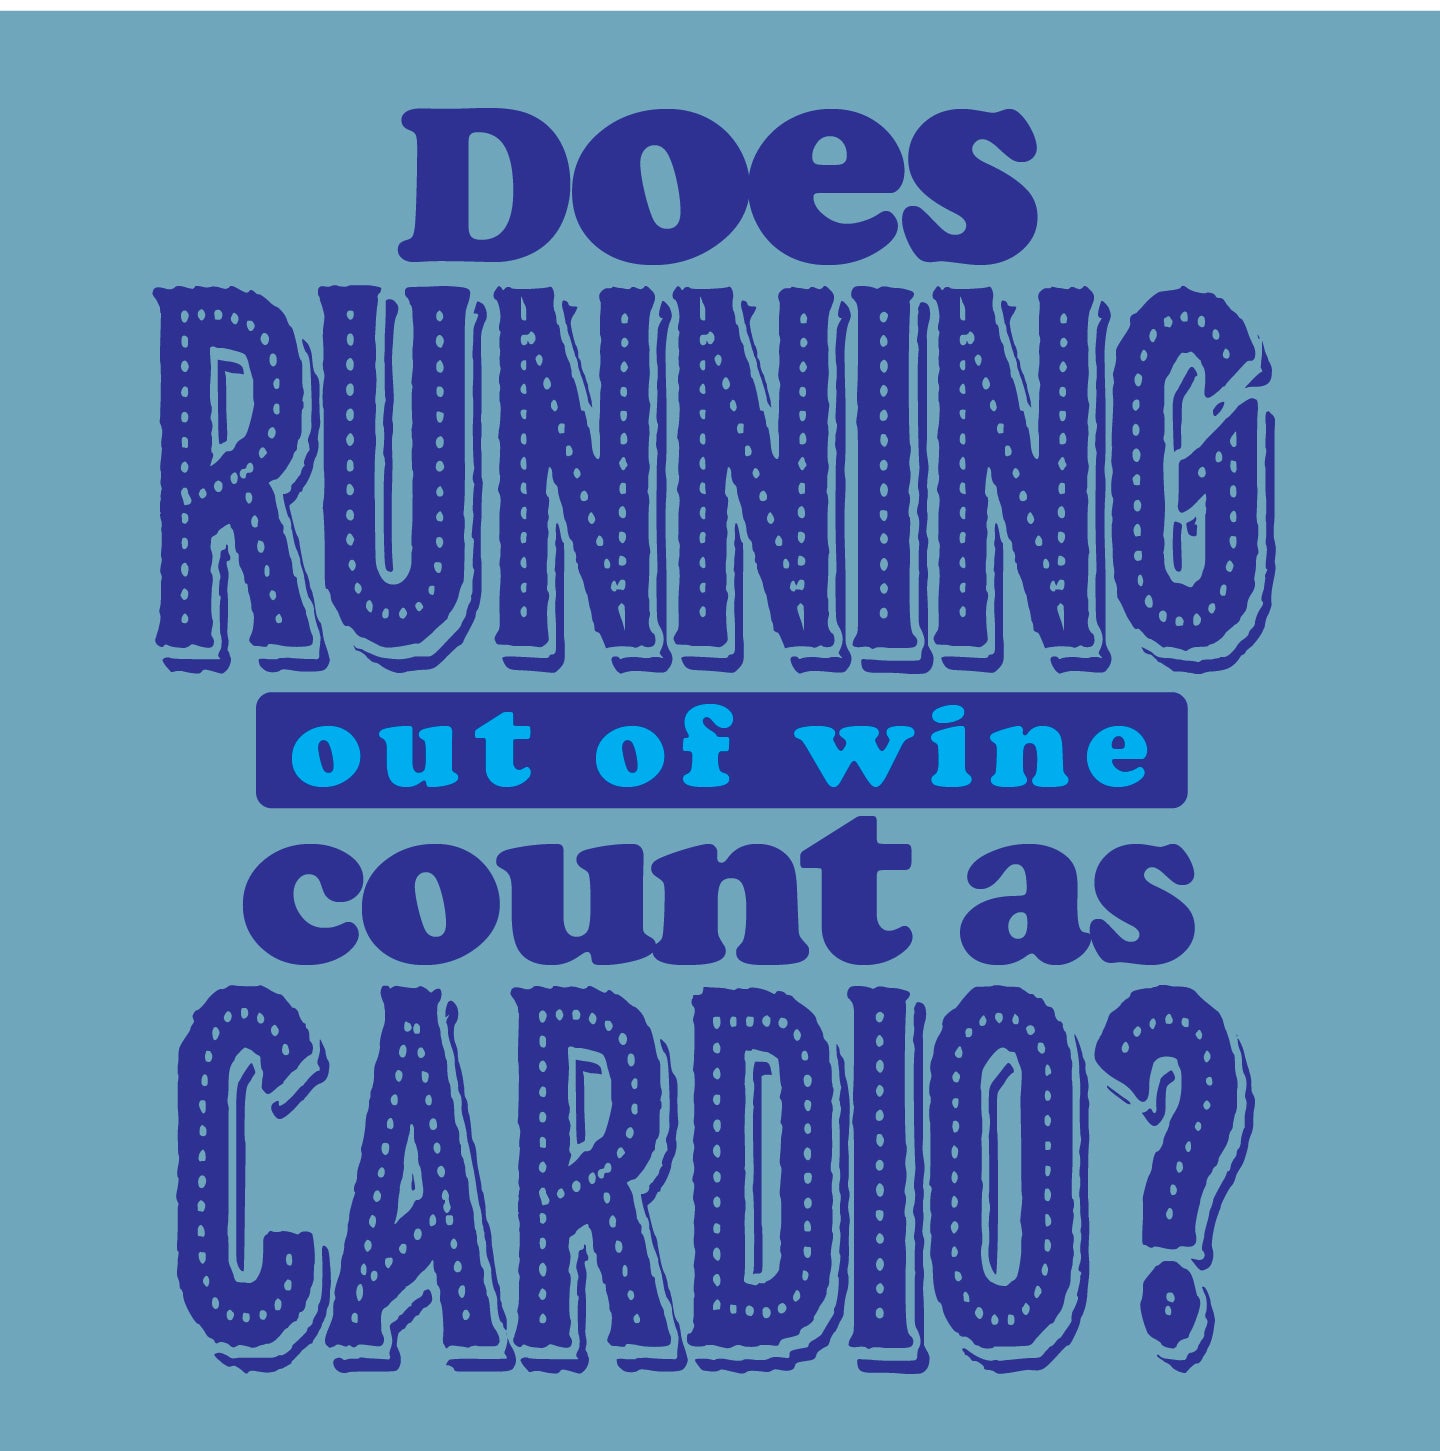 Does running out of wine count as cardio?